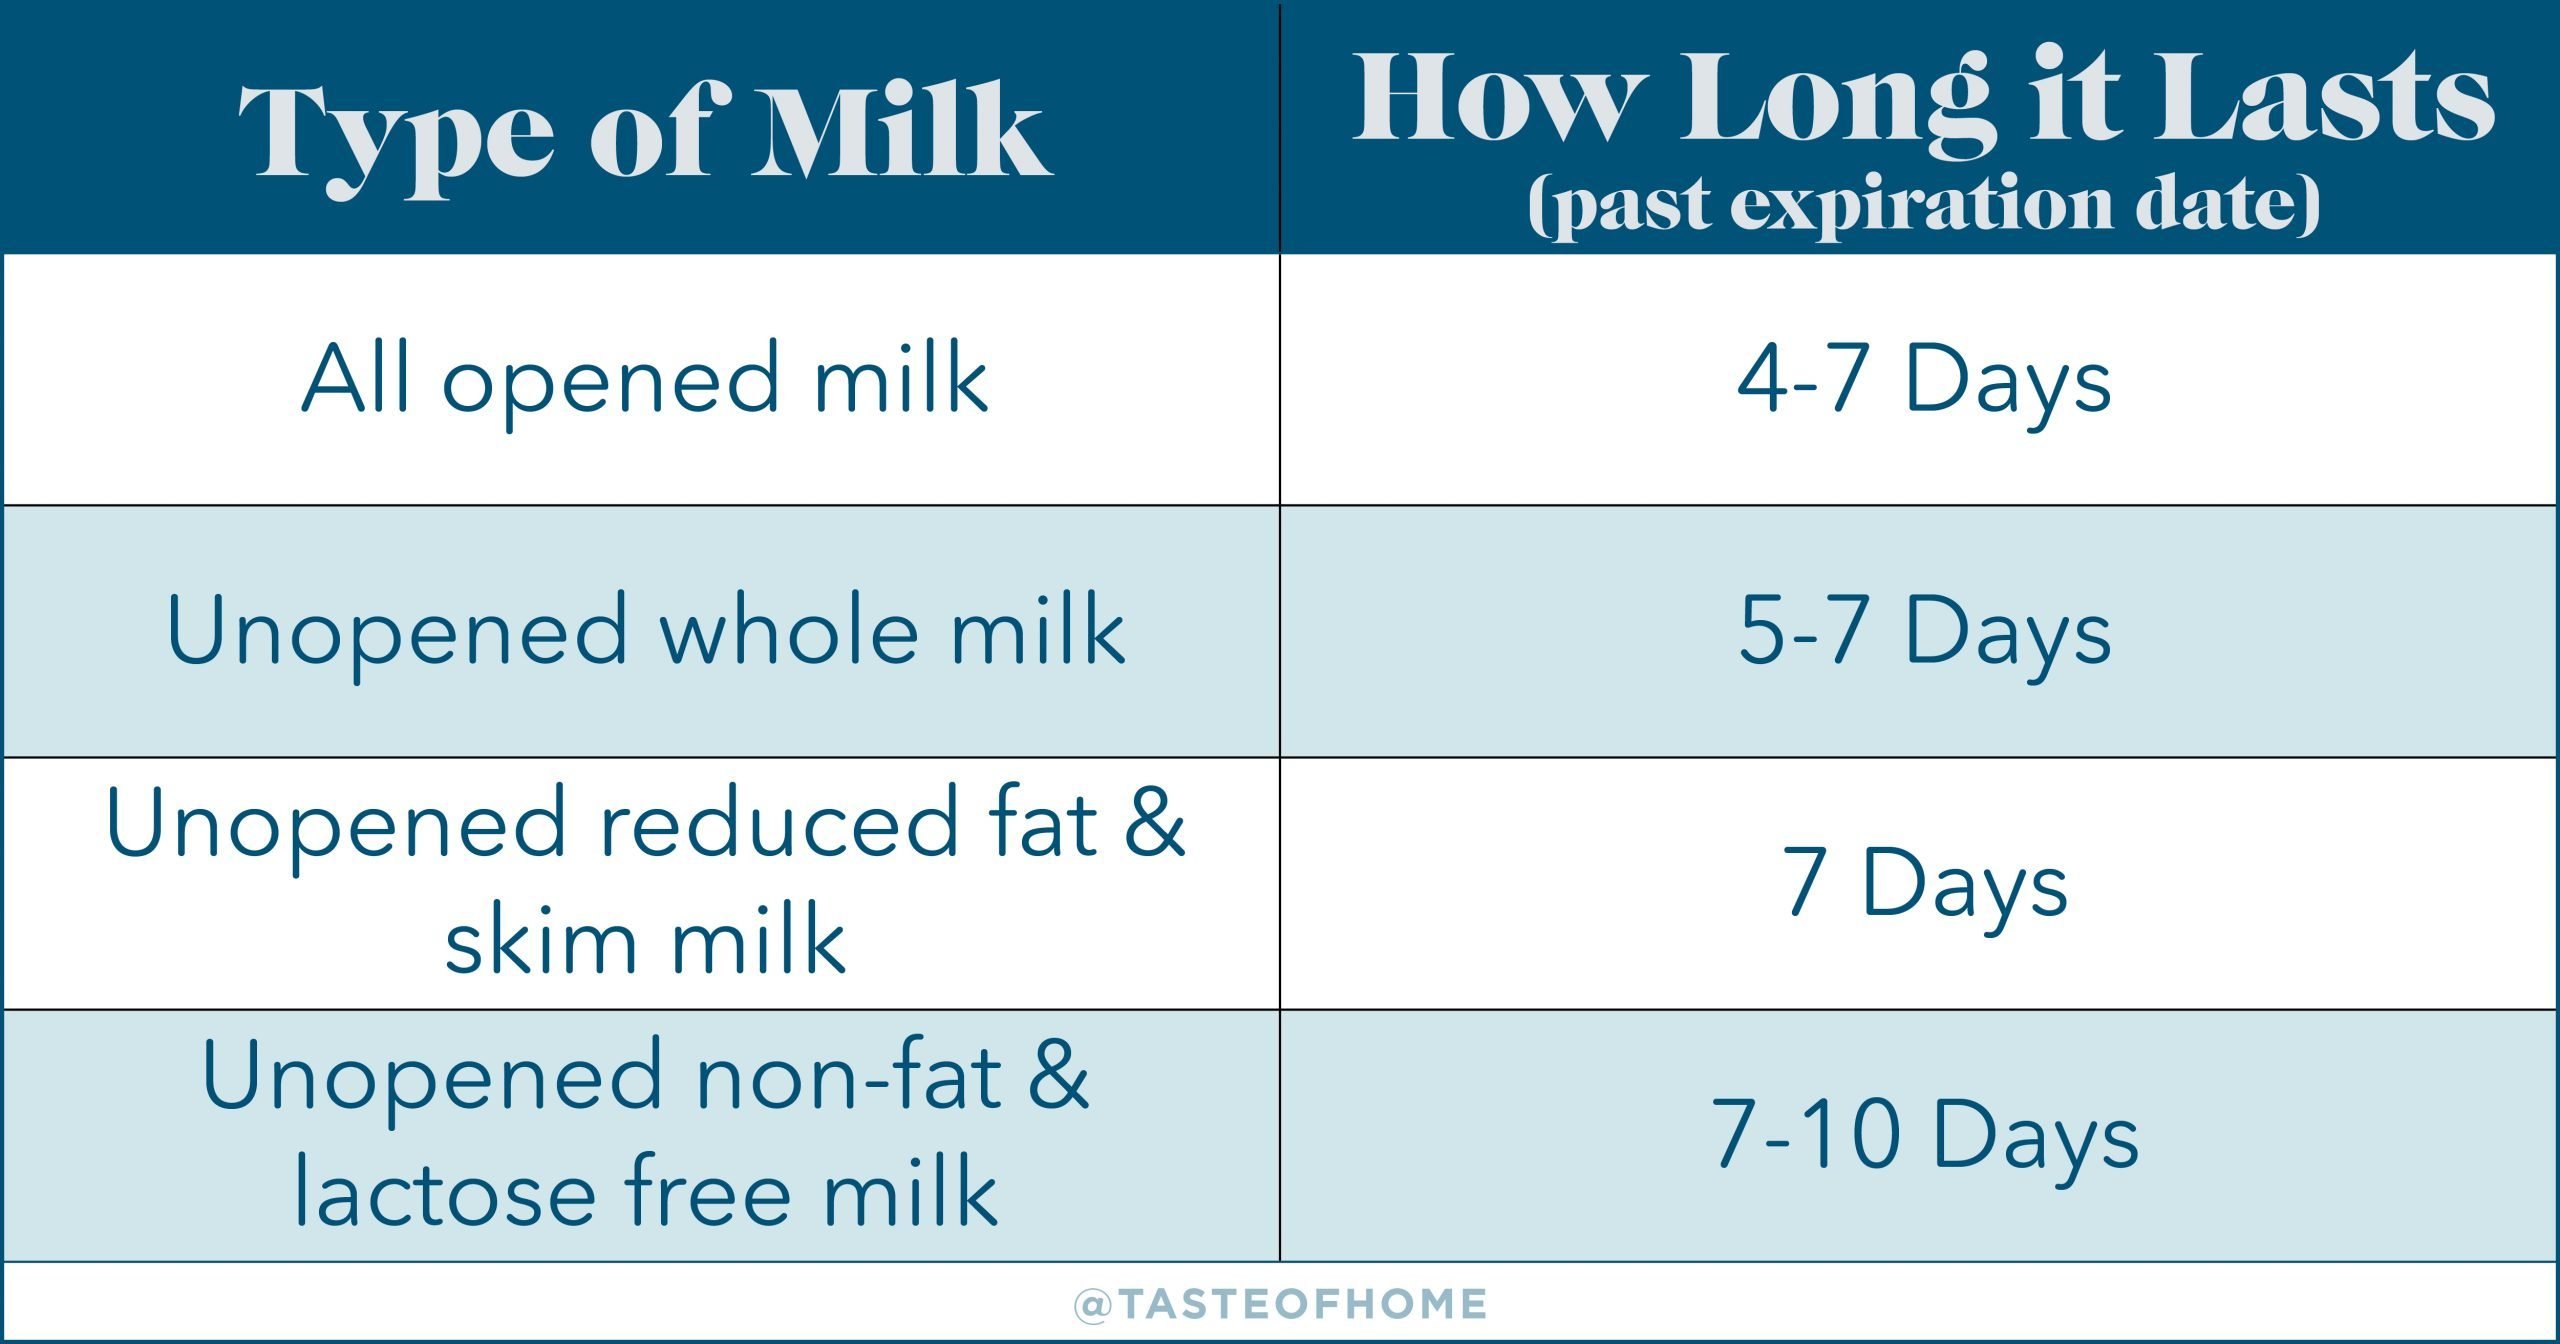 How Long Is Milk Good After the Sell-By Date?, How Long Milk Lasts